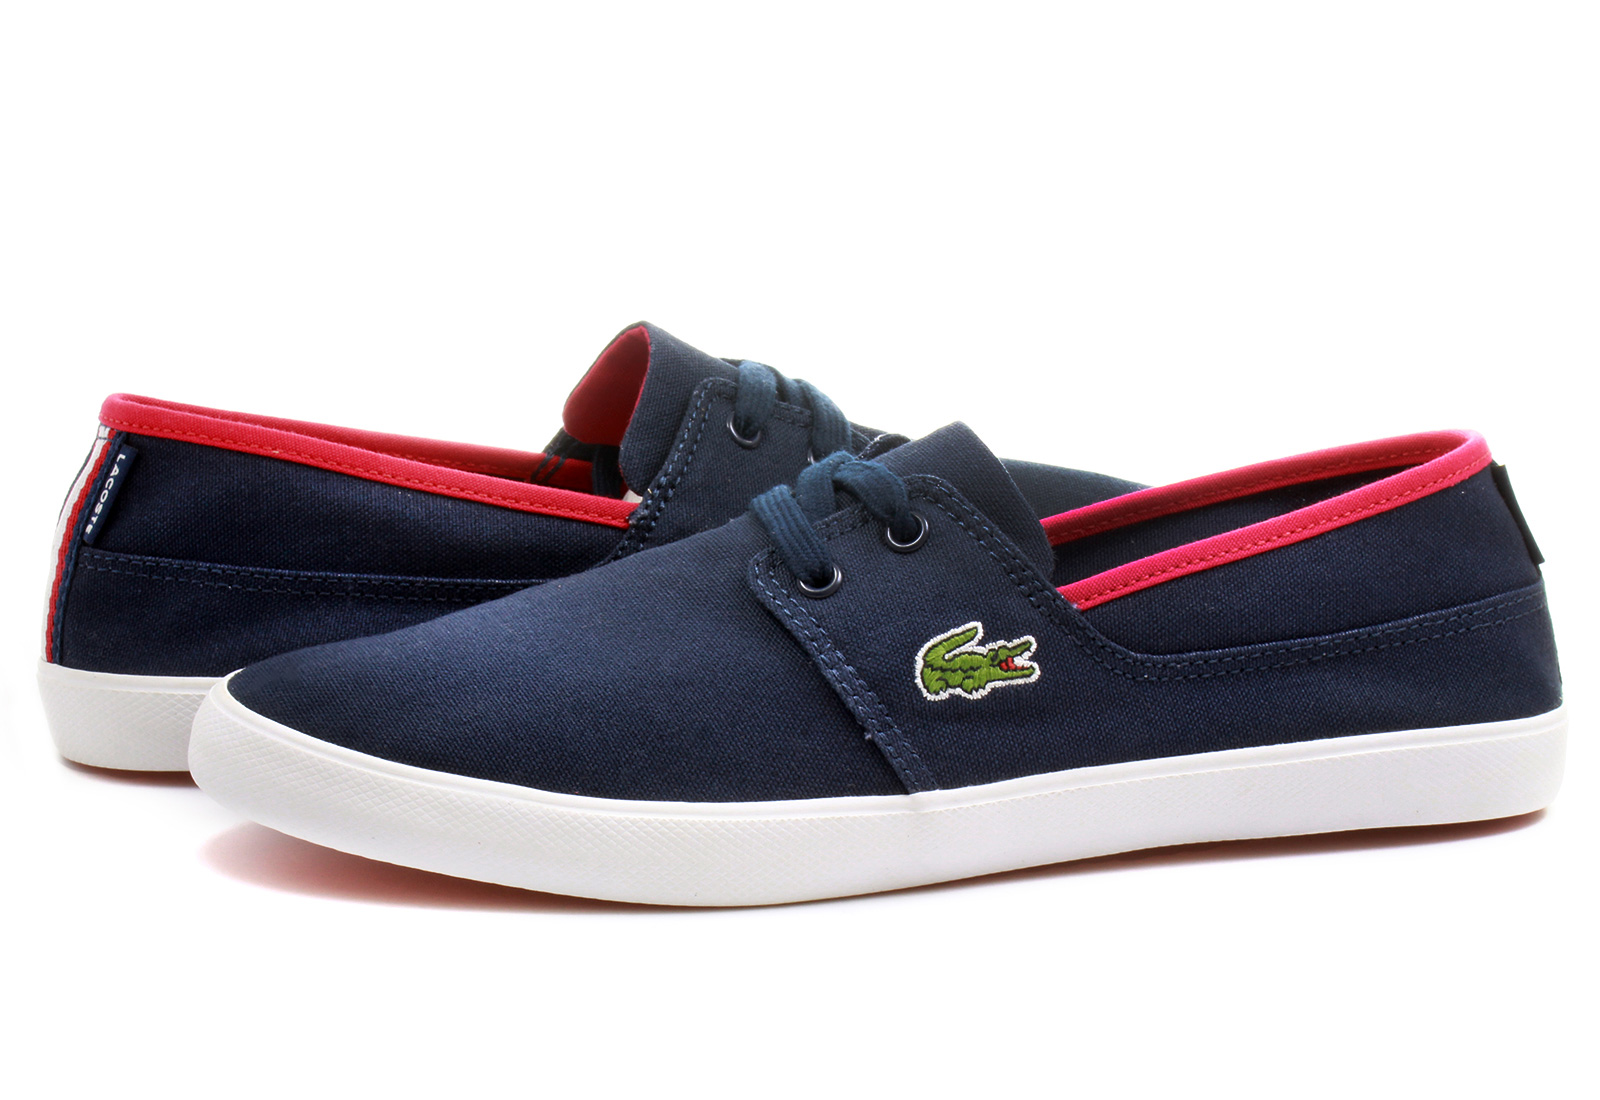 Lacoste Shoes - Marice Lace - 142spm3003-db4 - Online shop for sneakers ...